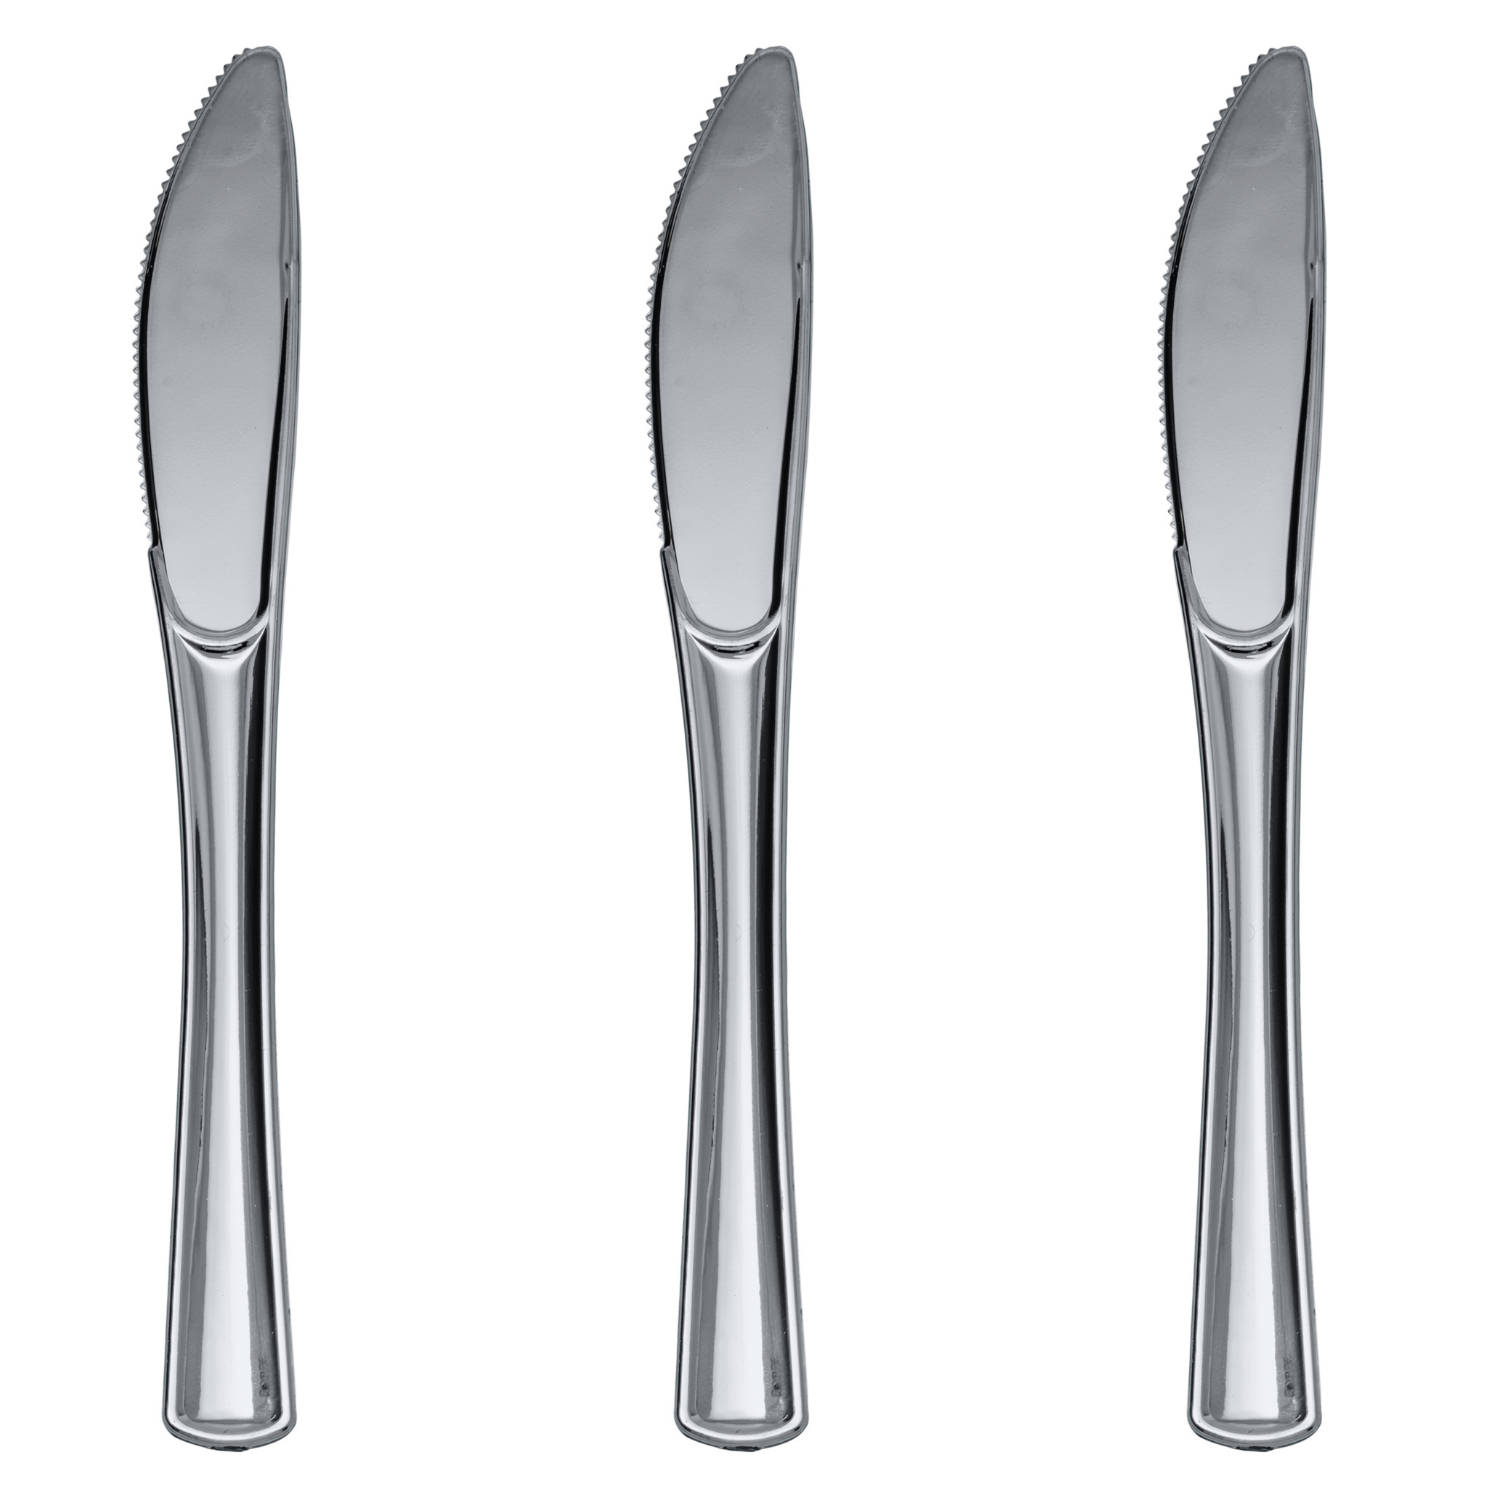 Exquisite Silver Plastic Knives | 480 Count - Yom Tov Settings